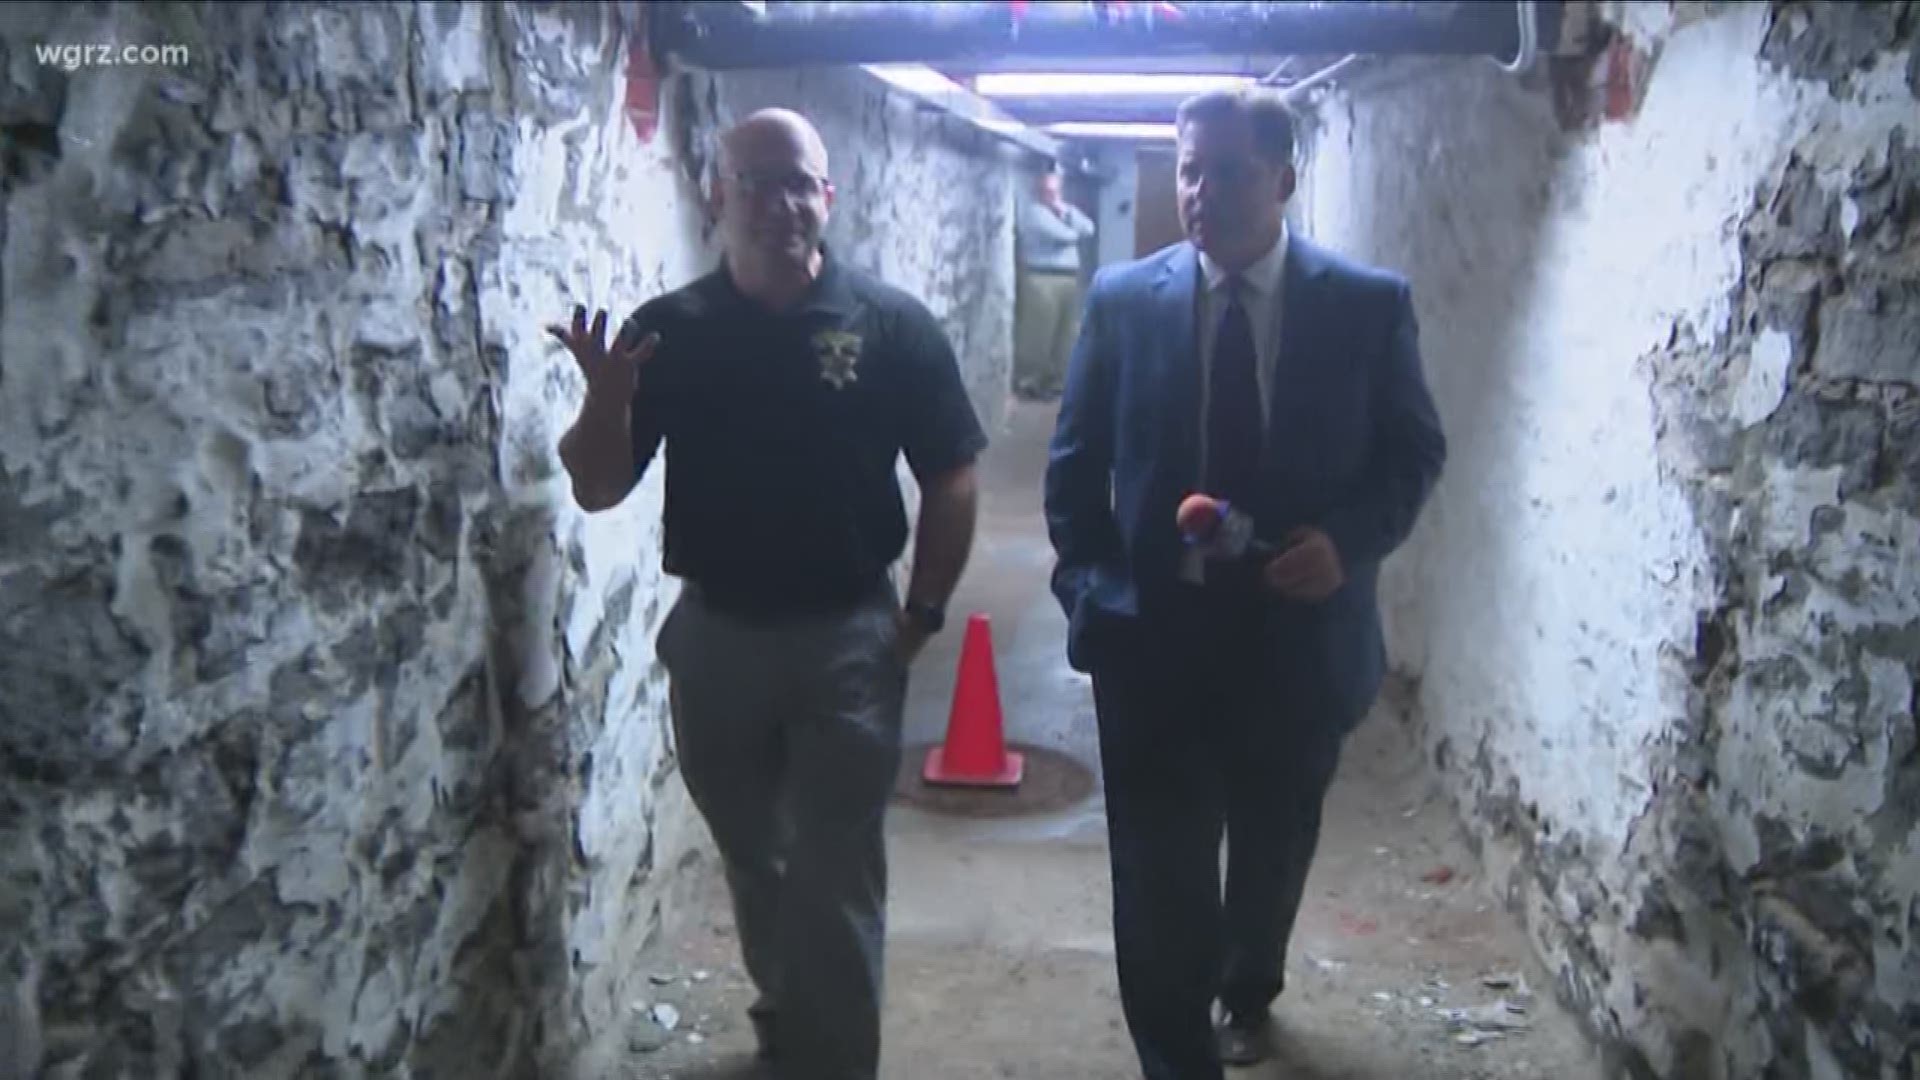 Story about the tunnel that connects the jail and the courthouse in downtown Buffalo